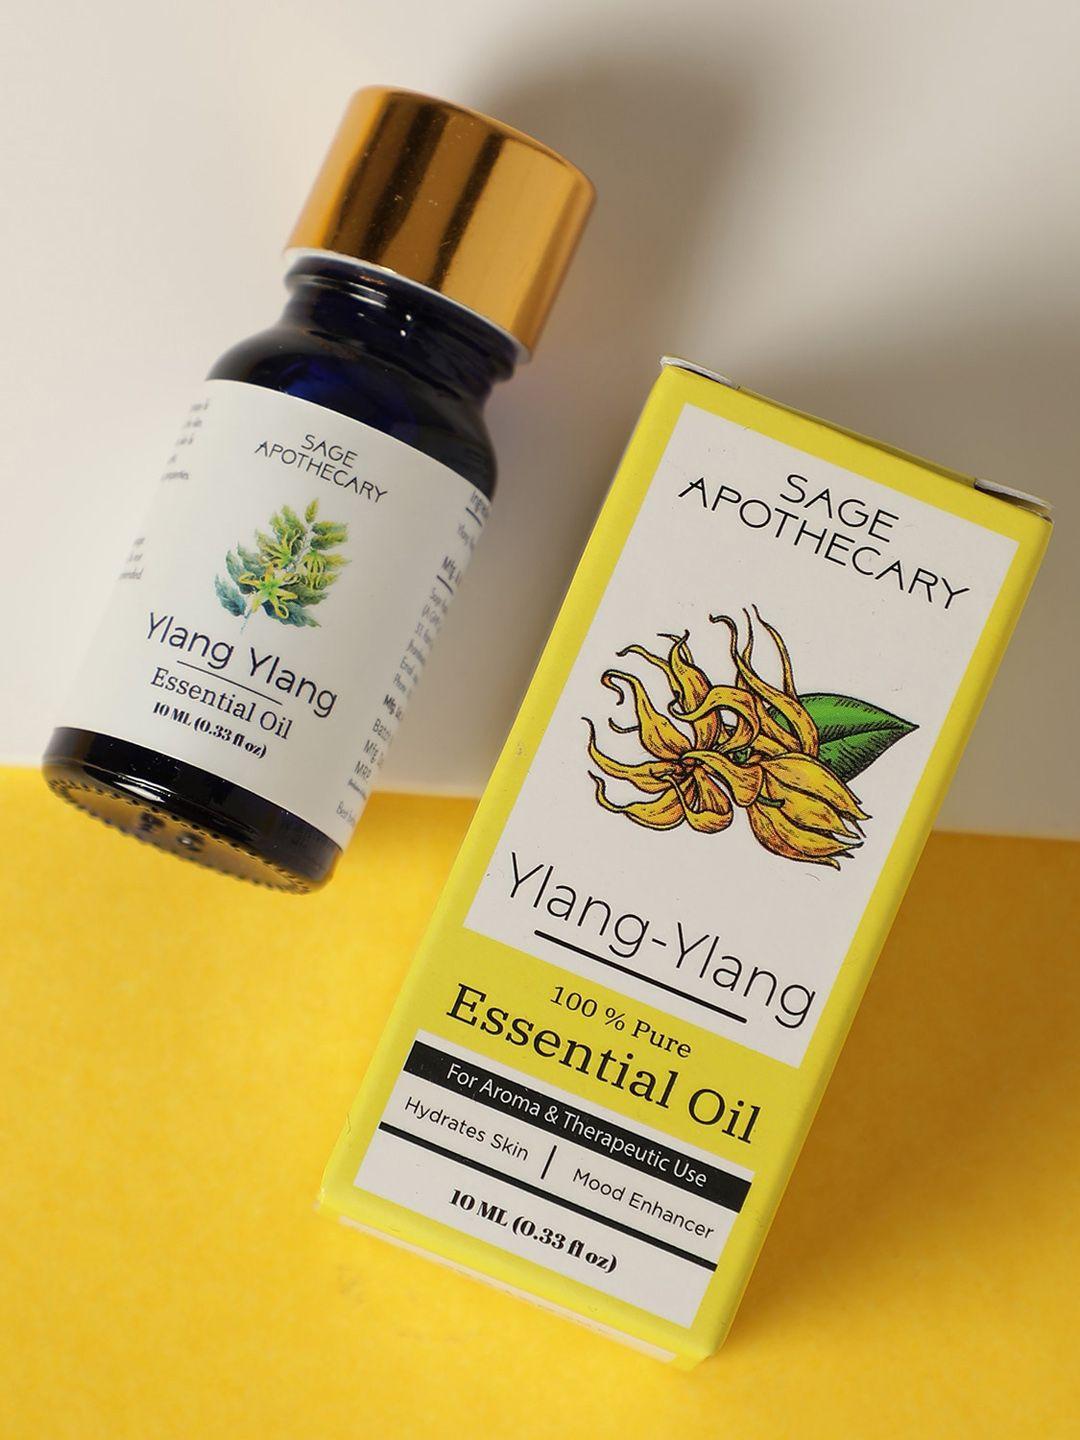 sage apothecary ylang-ylang essential oil for hydrating skin & mood enhancing - 10ml